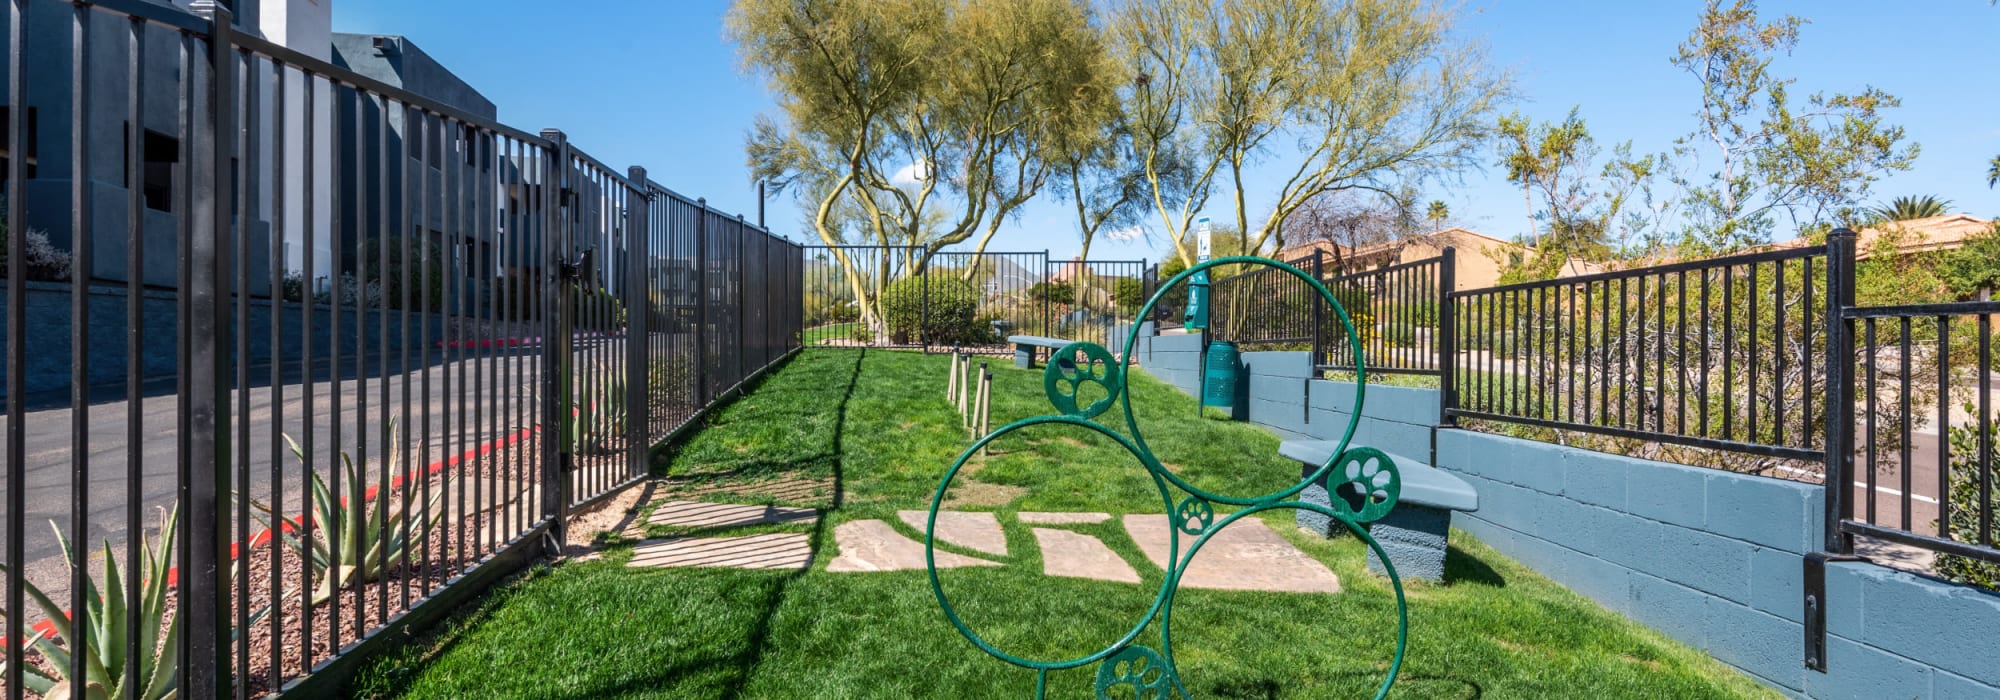 On-site dog park for residents at Luna at Fountain Hills in Fountain Hills, Arizona